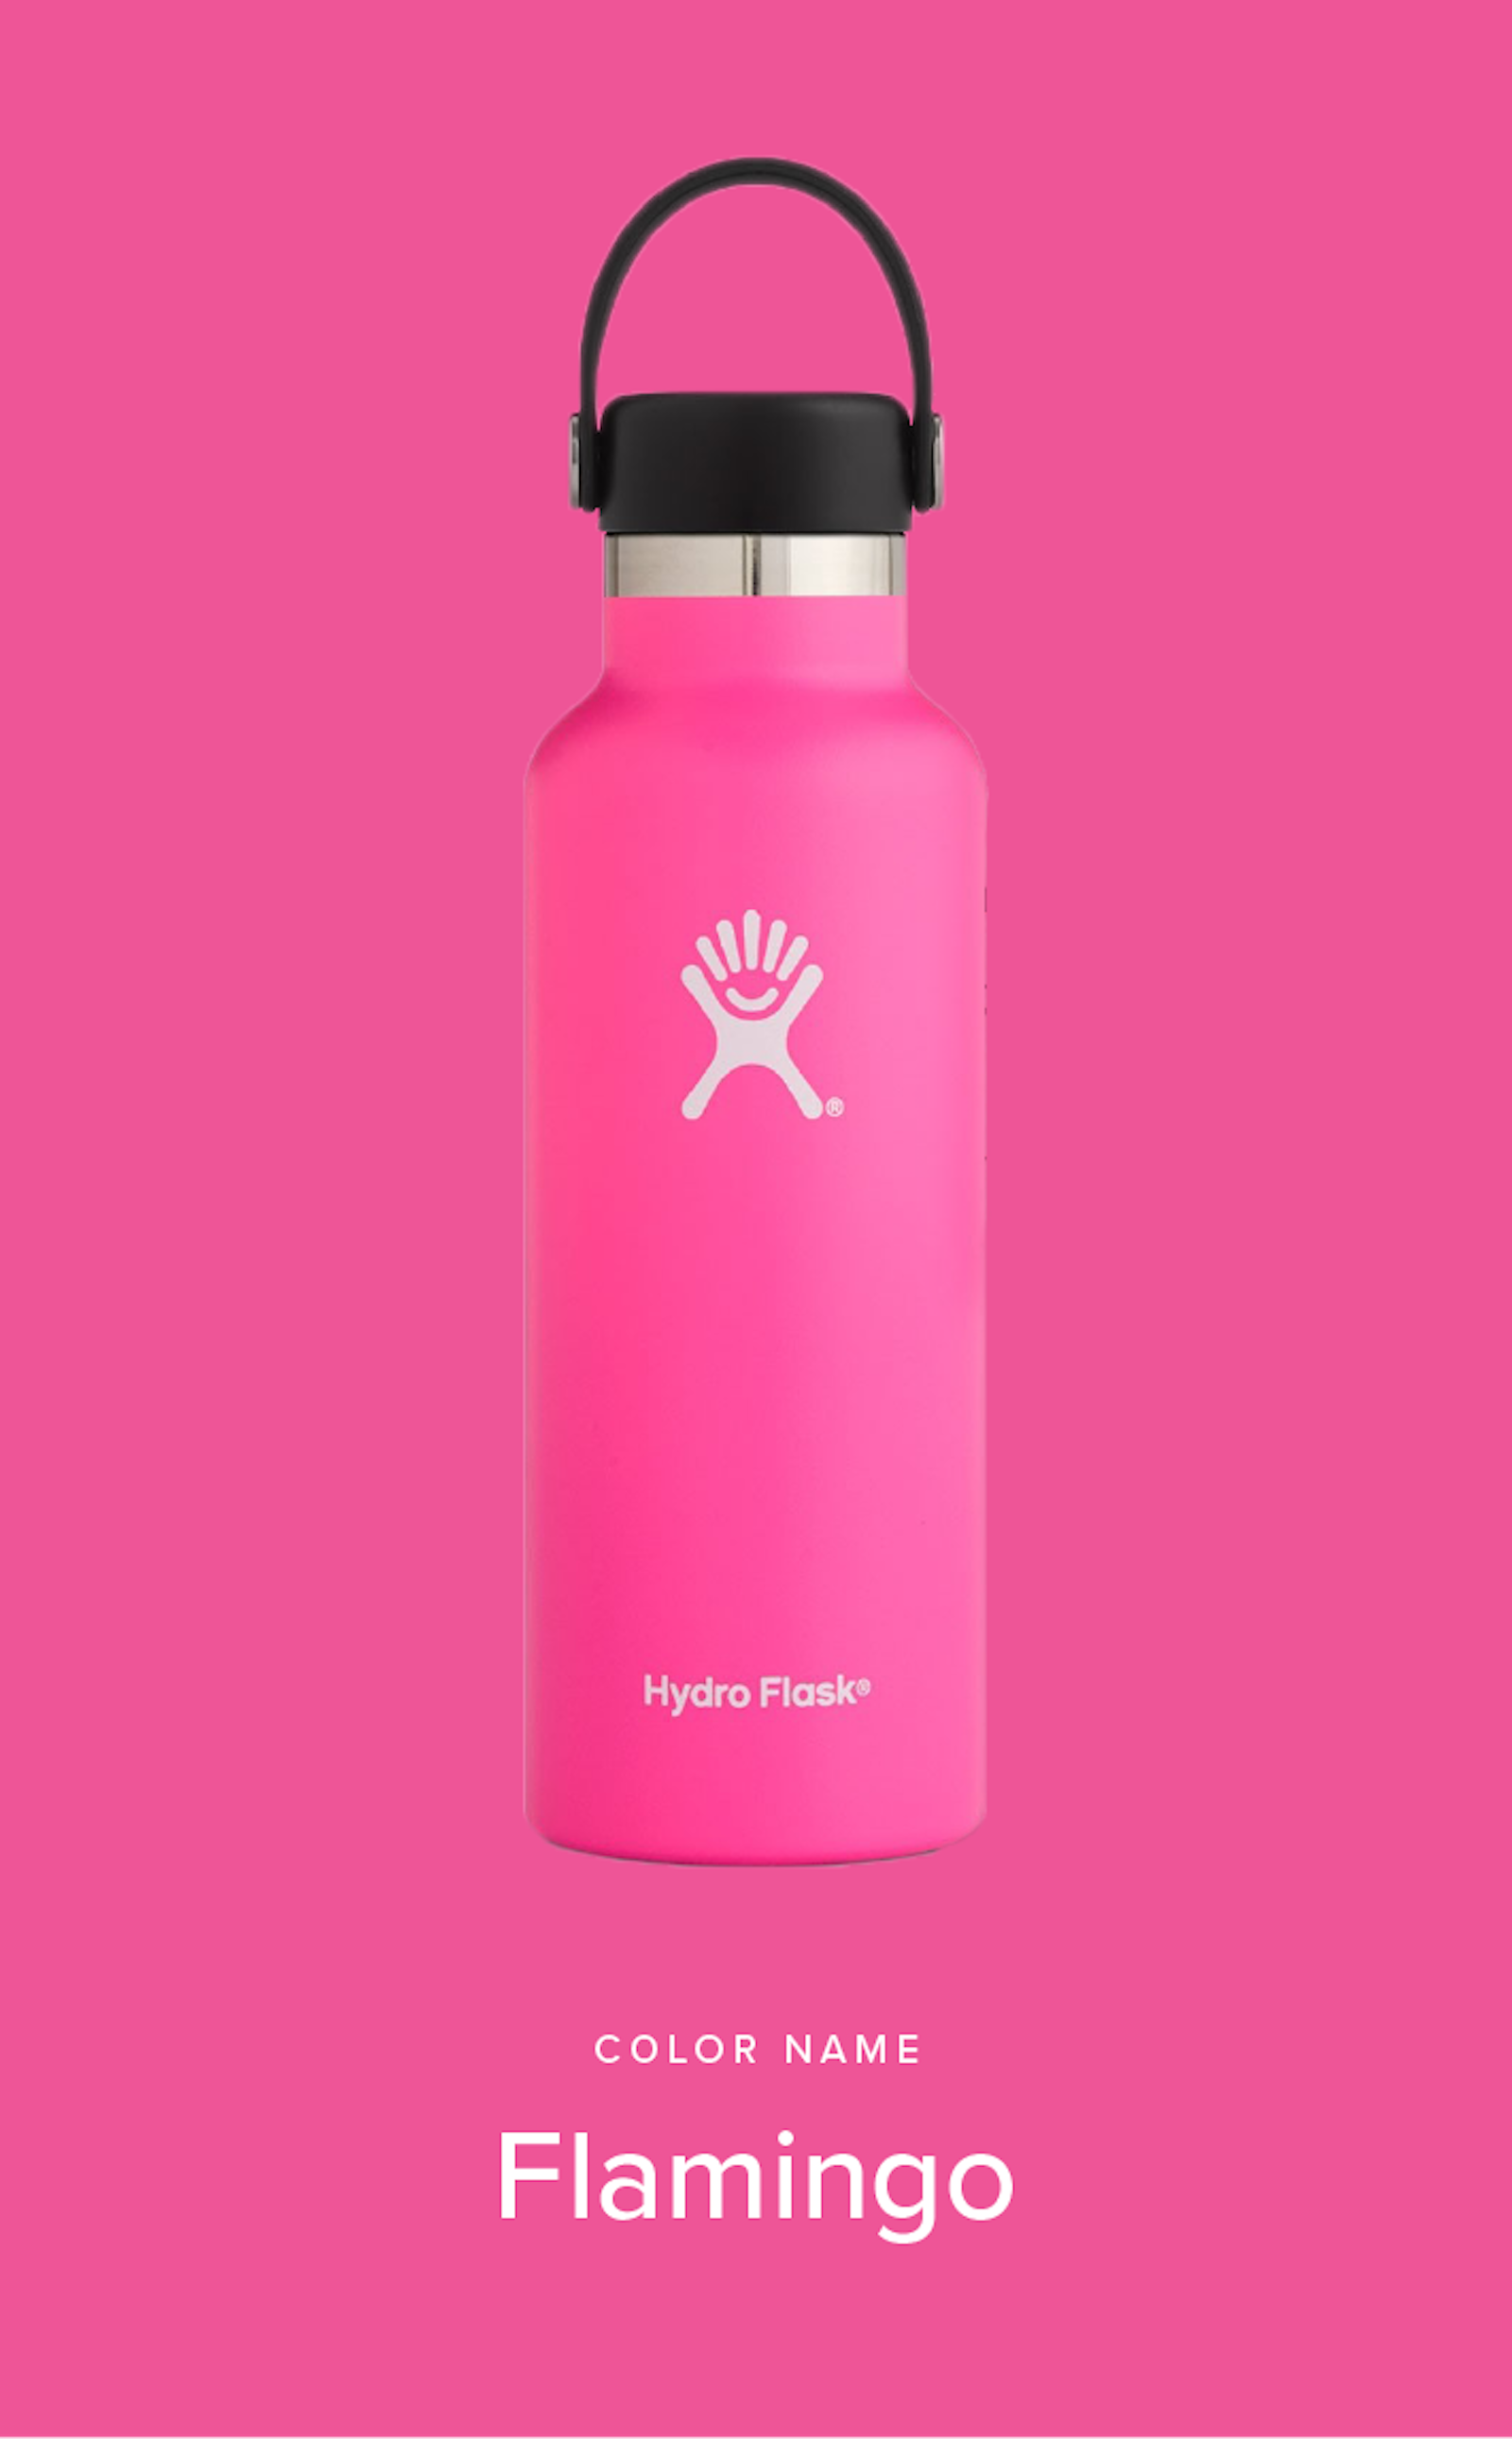 The Hydro Flask brand design for the Flamingo flask product on pink background.